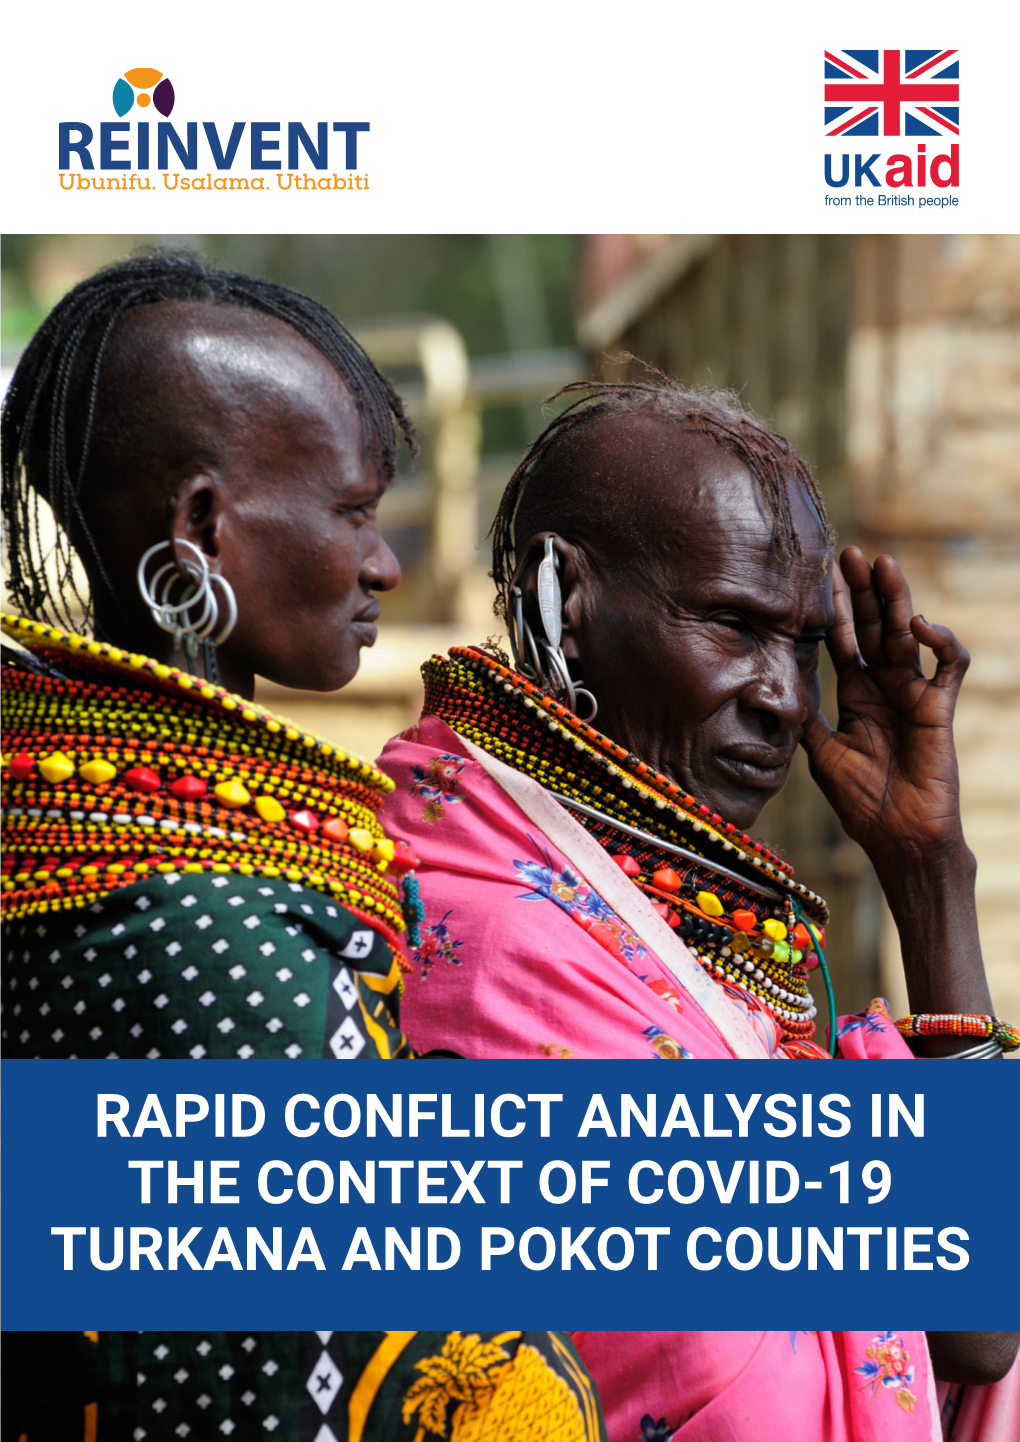 Rapid Conflict Analysis in the Context of Covid-19 Turkana and Pokot Counties 2 Rapid Conflict Analysis in the Context of Covid-19 Turkana and Pokot Counties